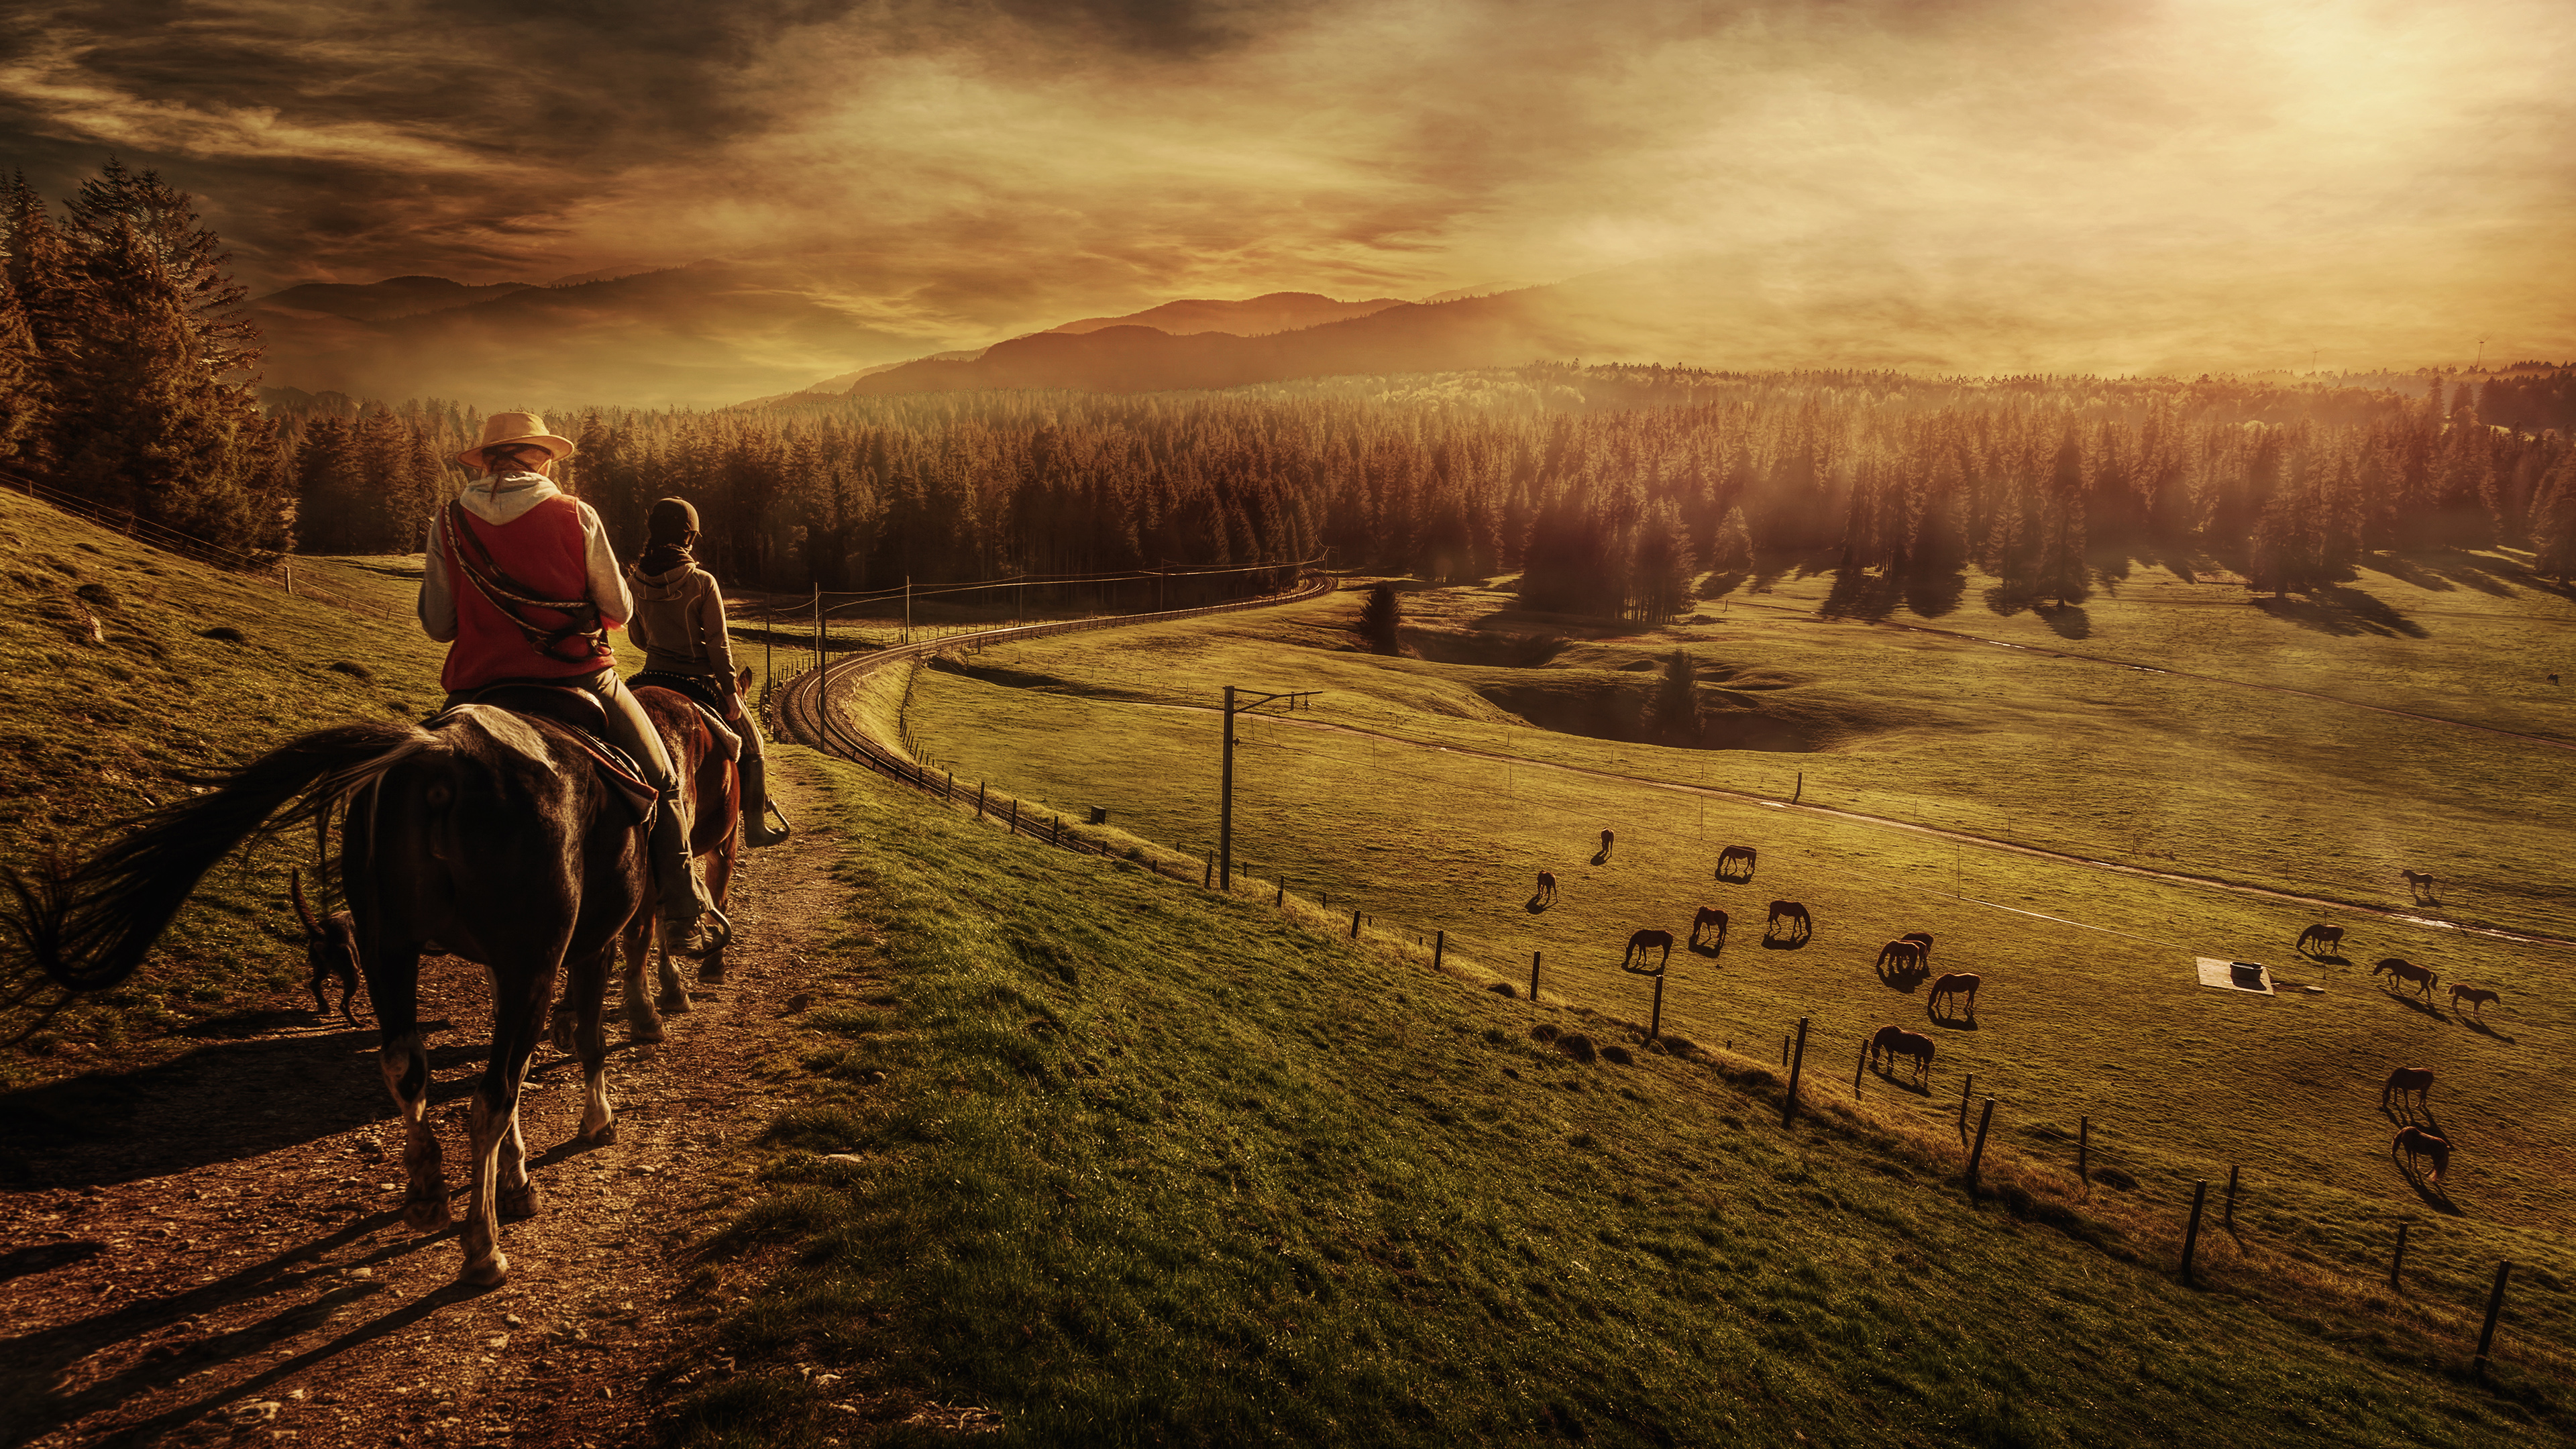 sunset, people, landscape, photography, horse, horse riding lock screen backgrounds